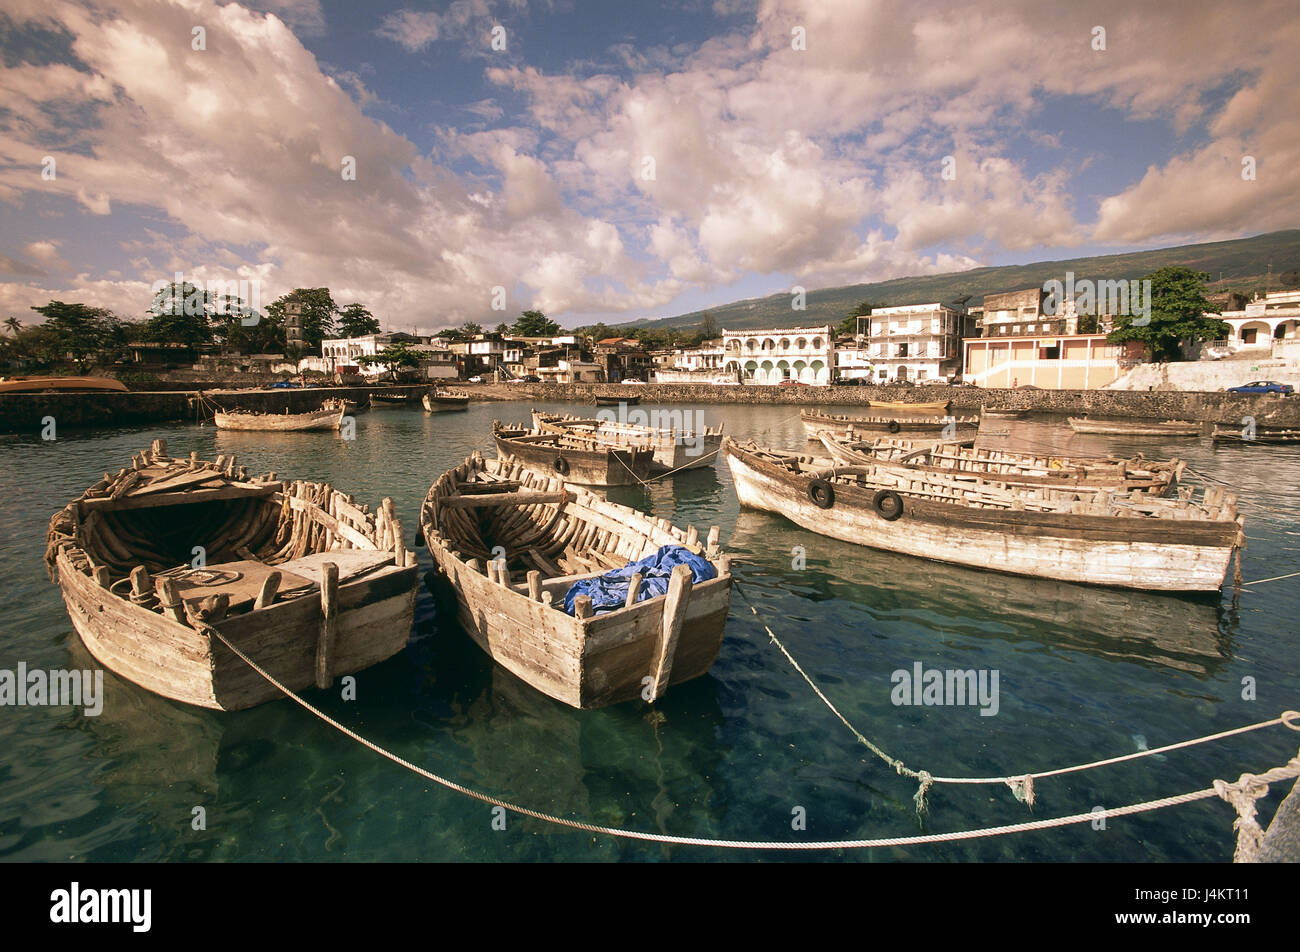 The Comoro Archipelago, island Grand Comore, Moroni, harbour view, fishing boats Africa, island state, Indian ocean, Njazidja, town, townscape, port, harbour, fishing harbour, angling, boats, wooden boots, traditionally, evening light, sky, clouds Stock Photo